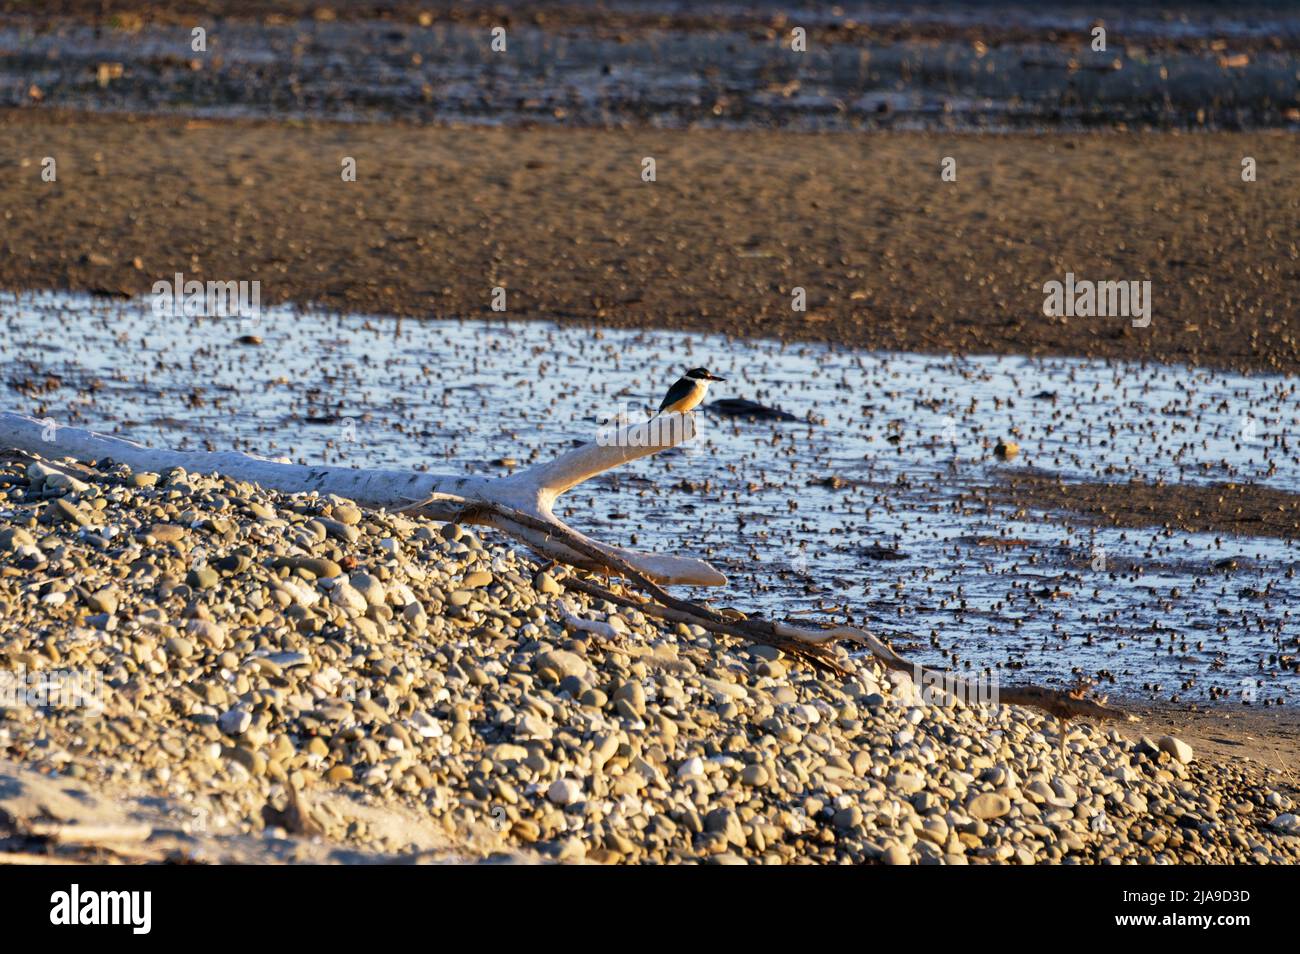 A kingfisher sits on driftwood overlooking the tidal zone. Snails are in the mud in the background. Stock Photo